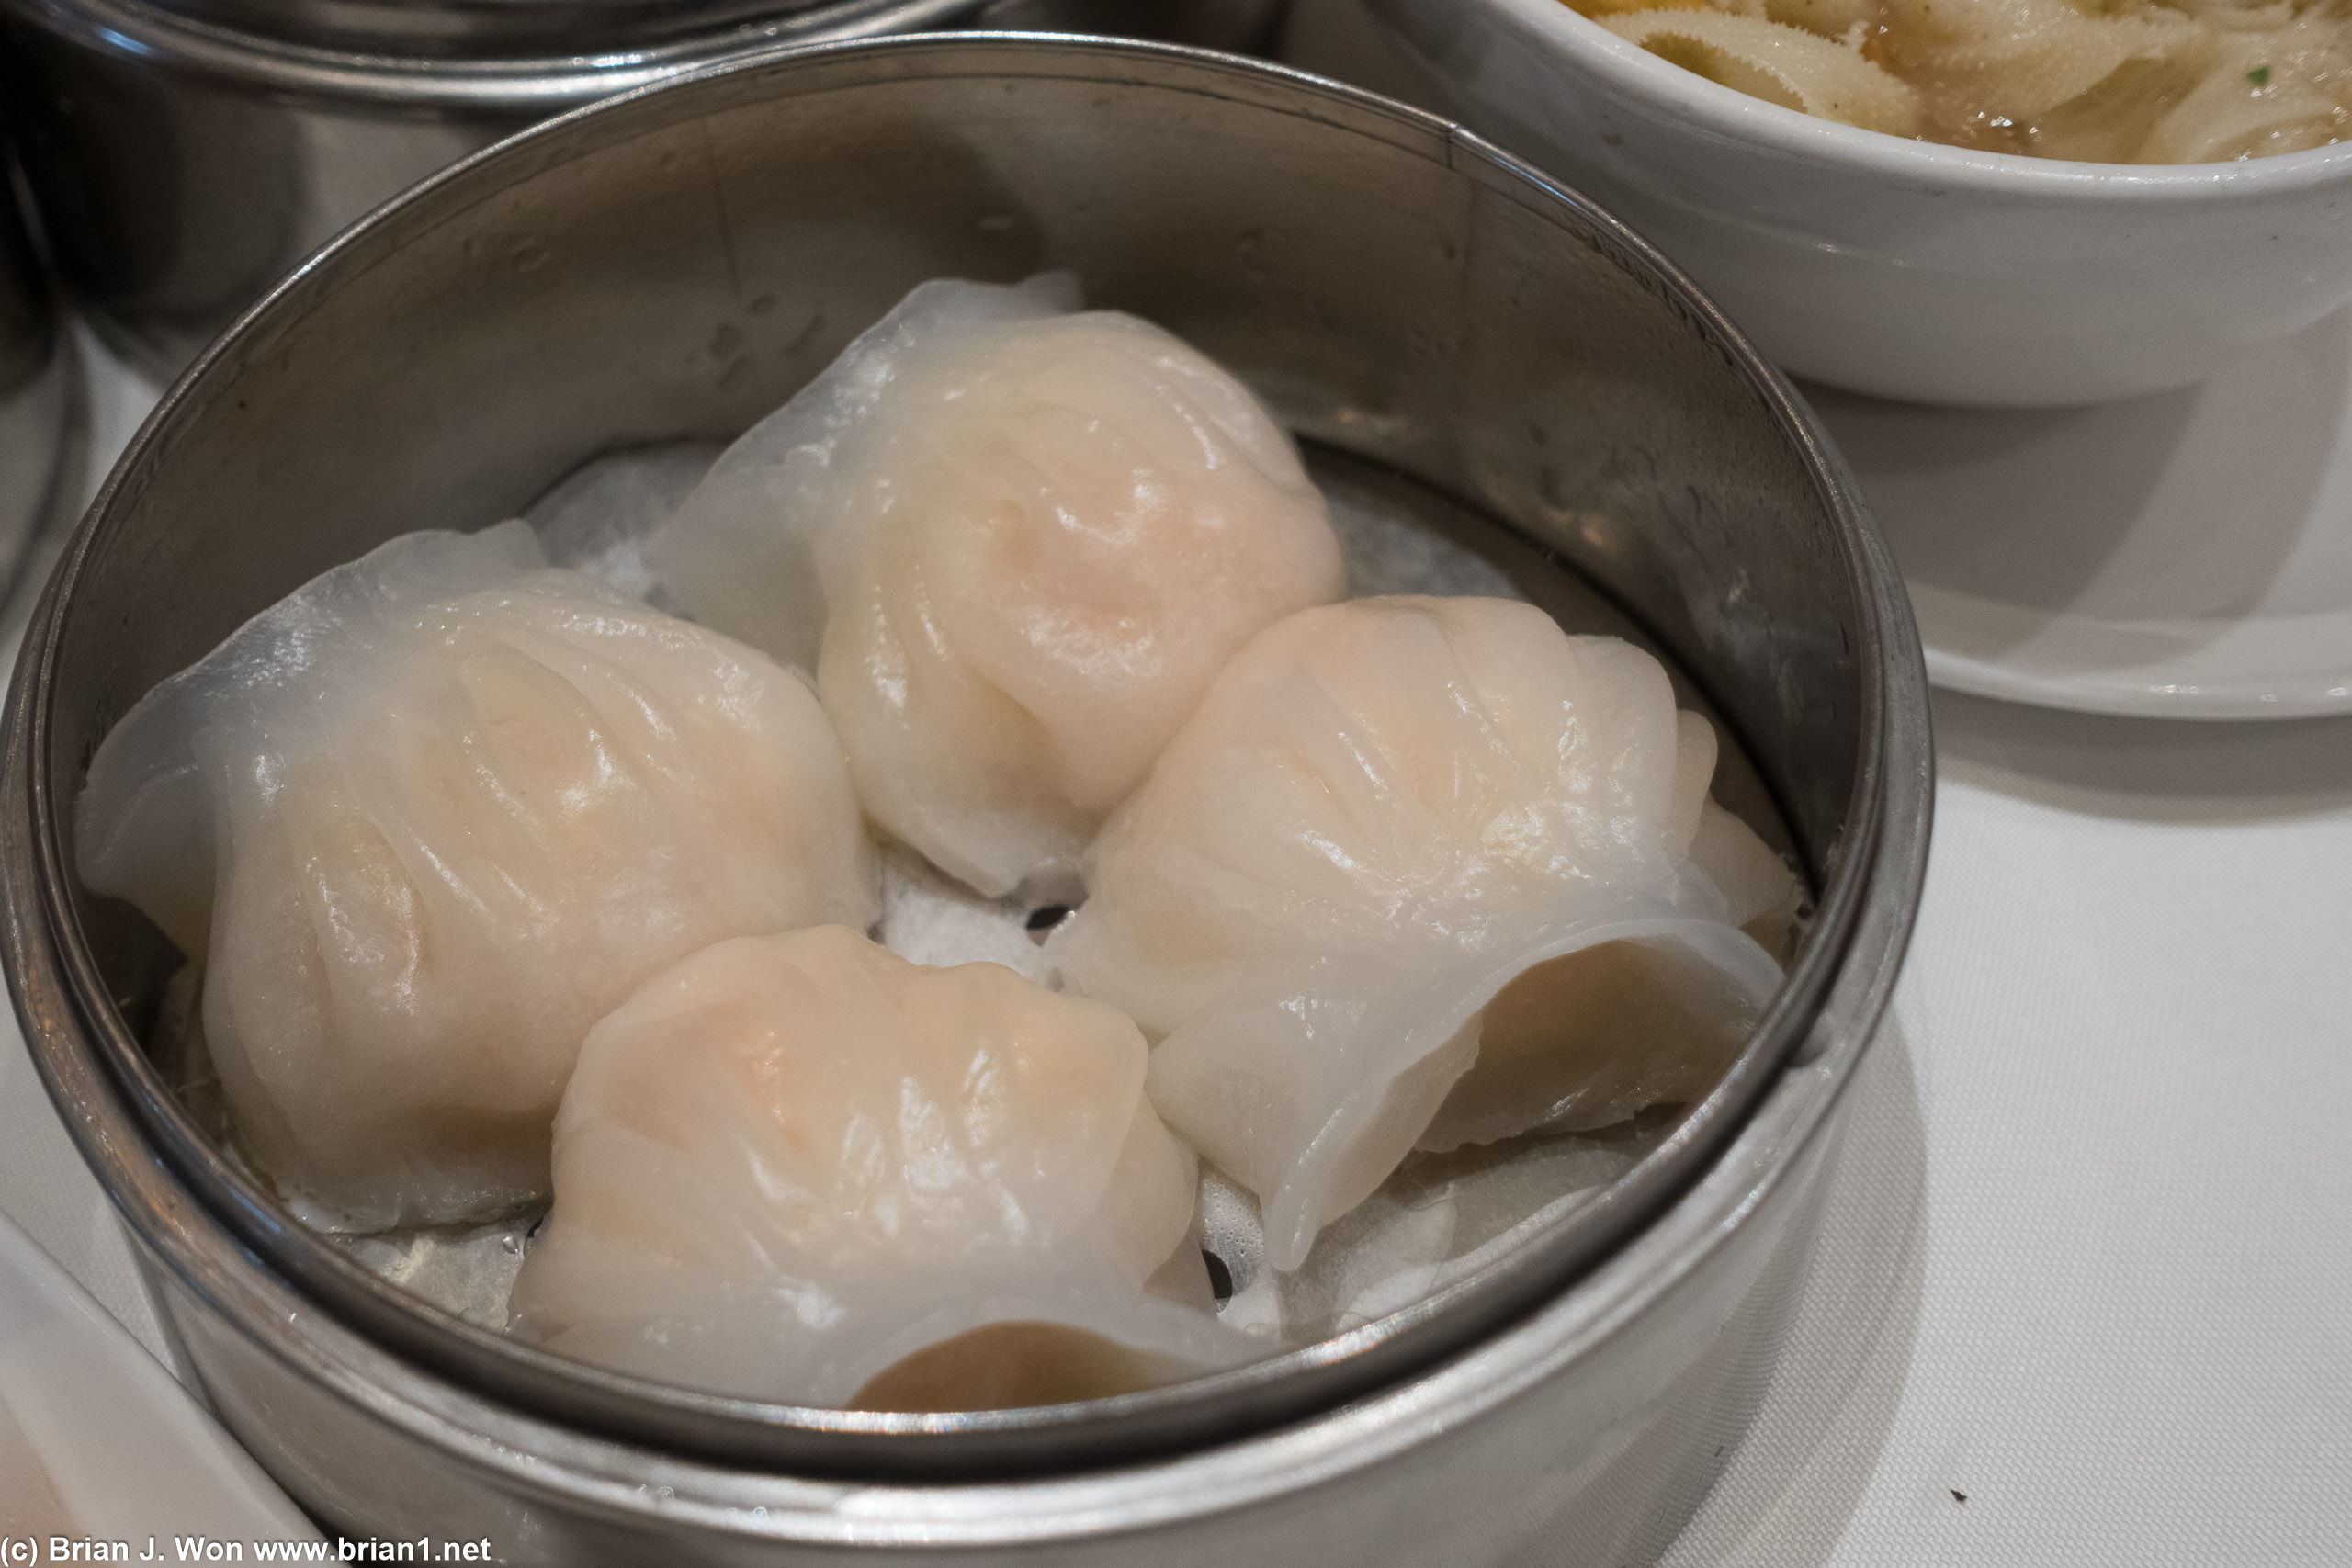 Har gow not bad, skins only a tad too thick.